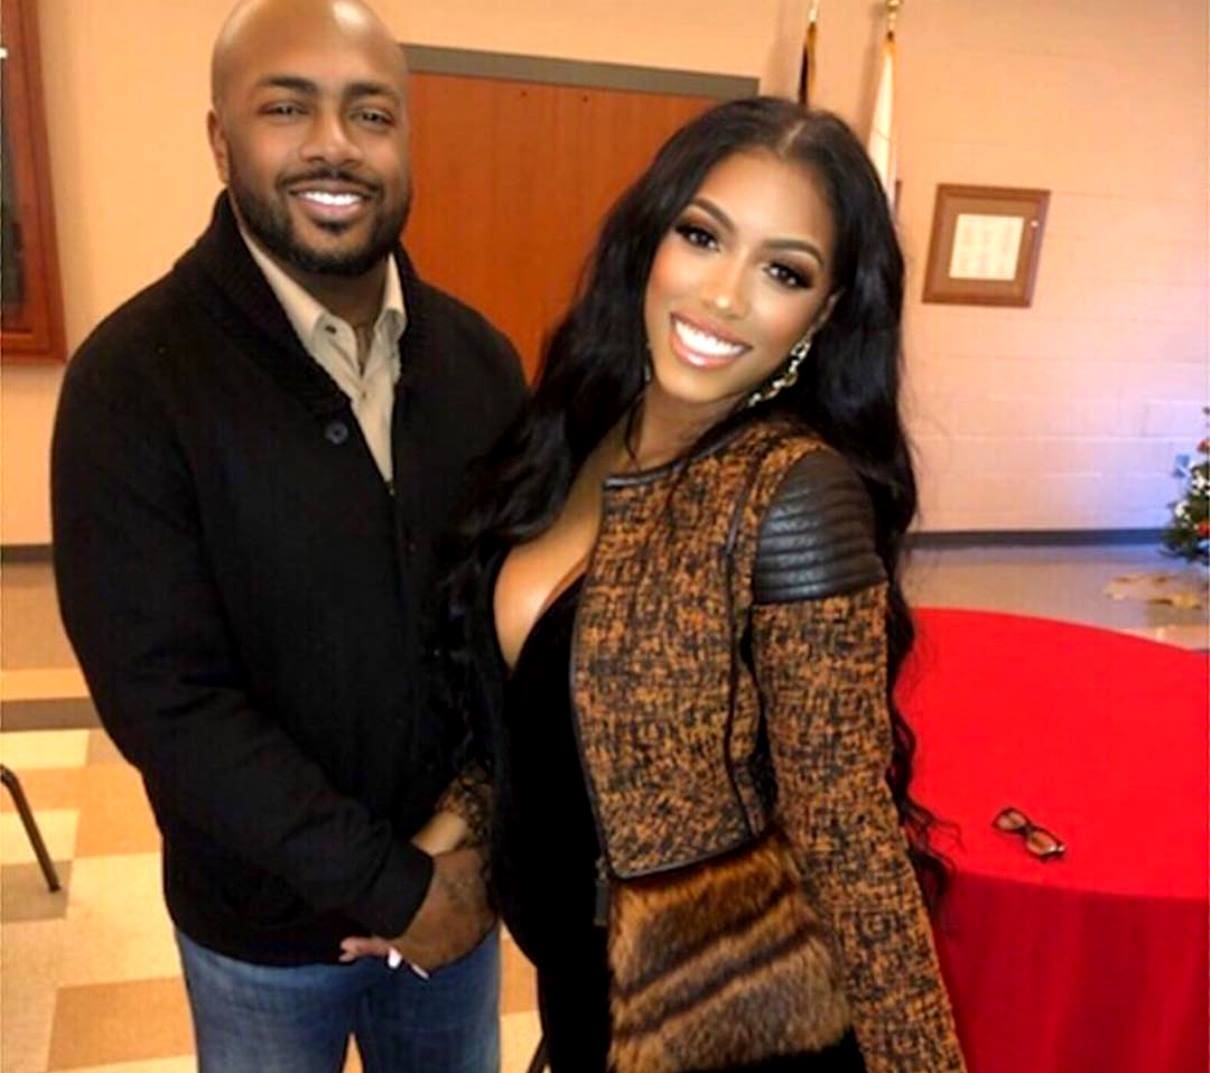 Porsha Williams Shares Footage And Images From The Atlanta Protests - She Was There With Dennis McKinley - Fans Are Freaking Out!